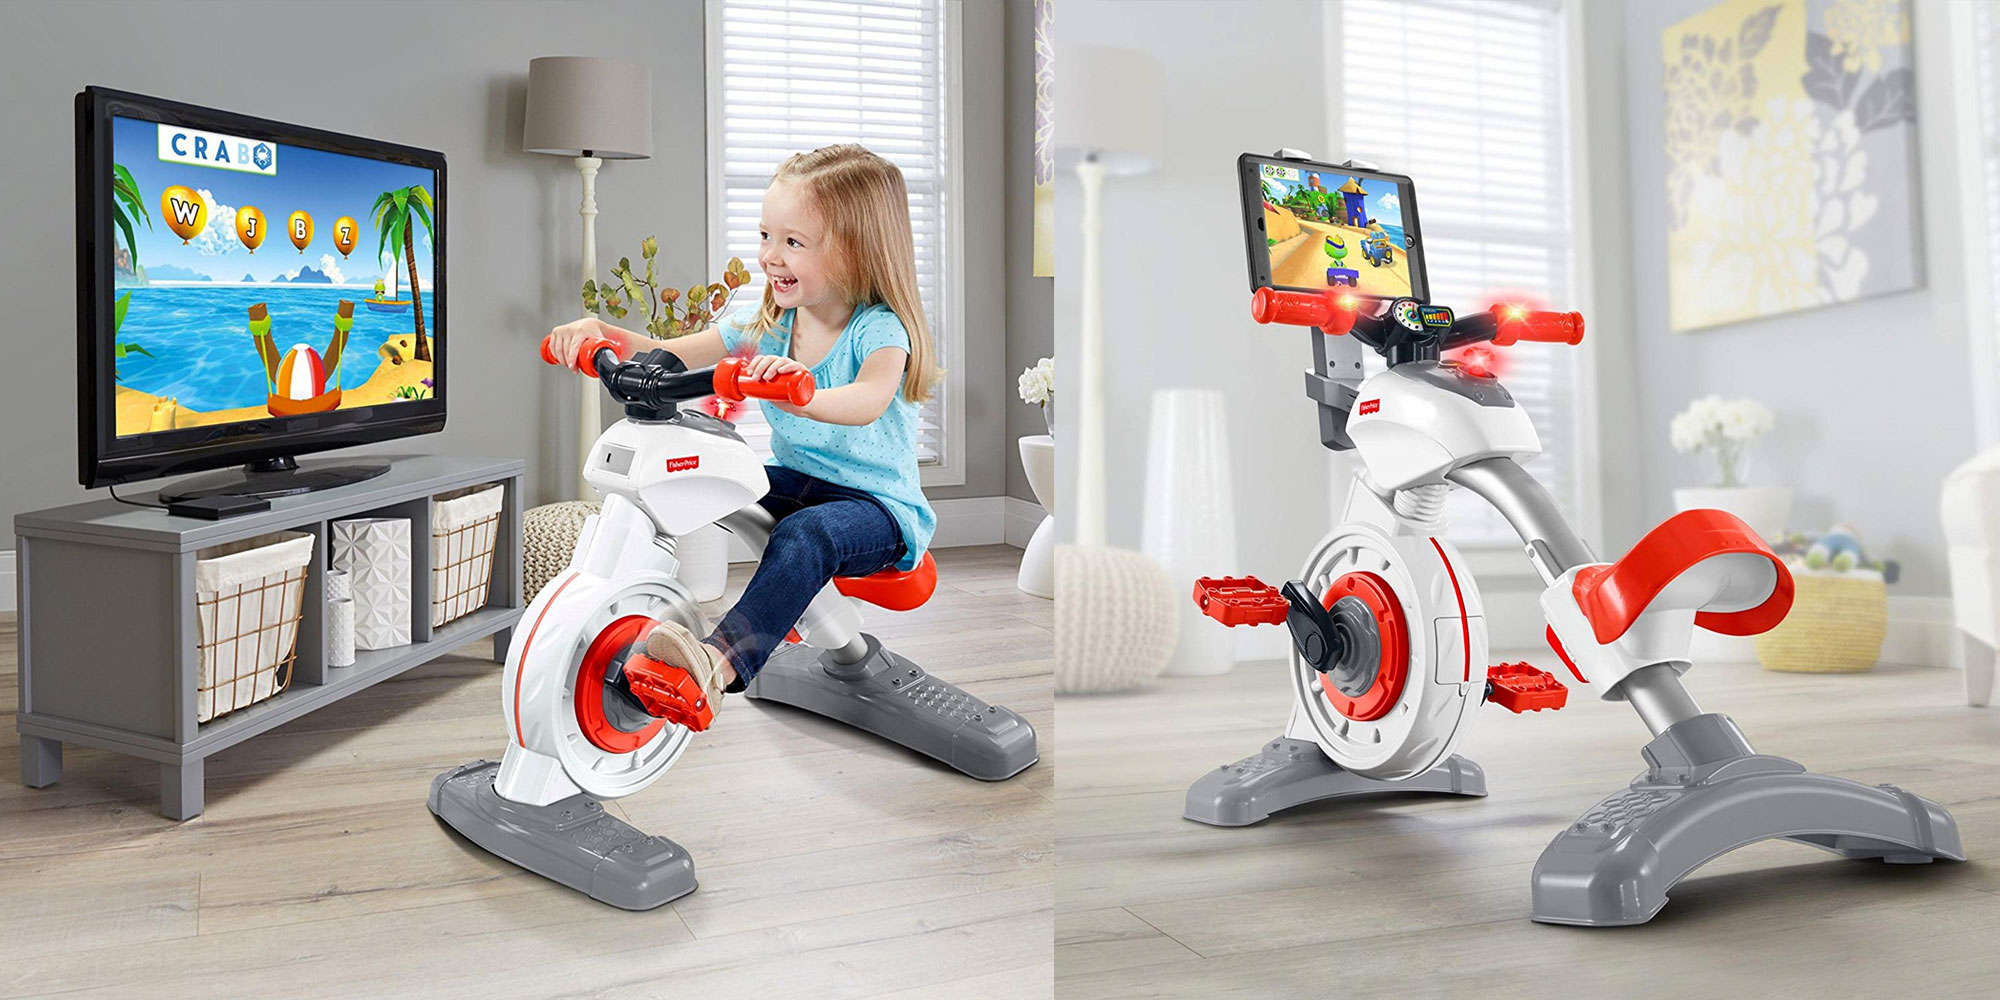 fisher price think and learn cycle